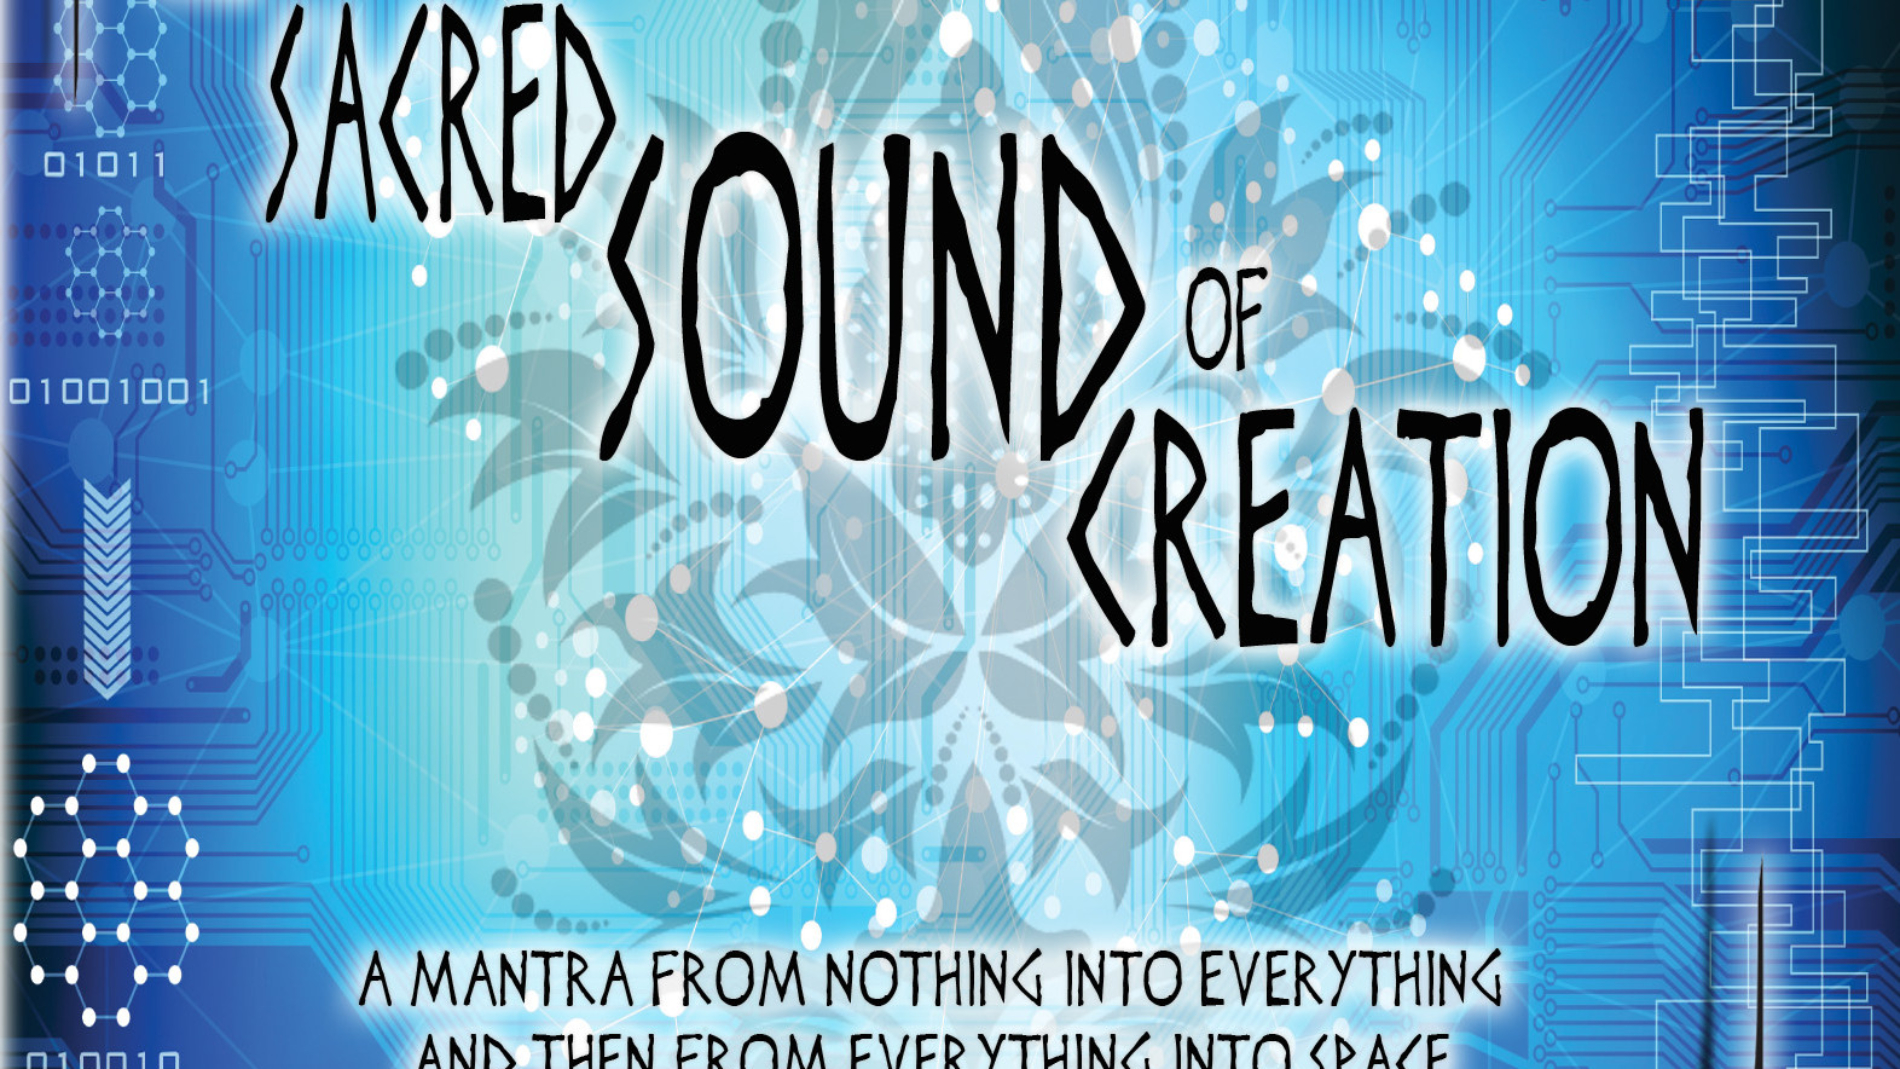 The Sacred Sound of Creation - New DVD Front Cover